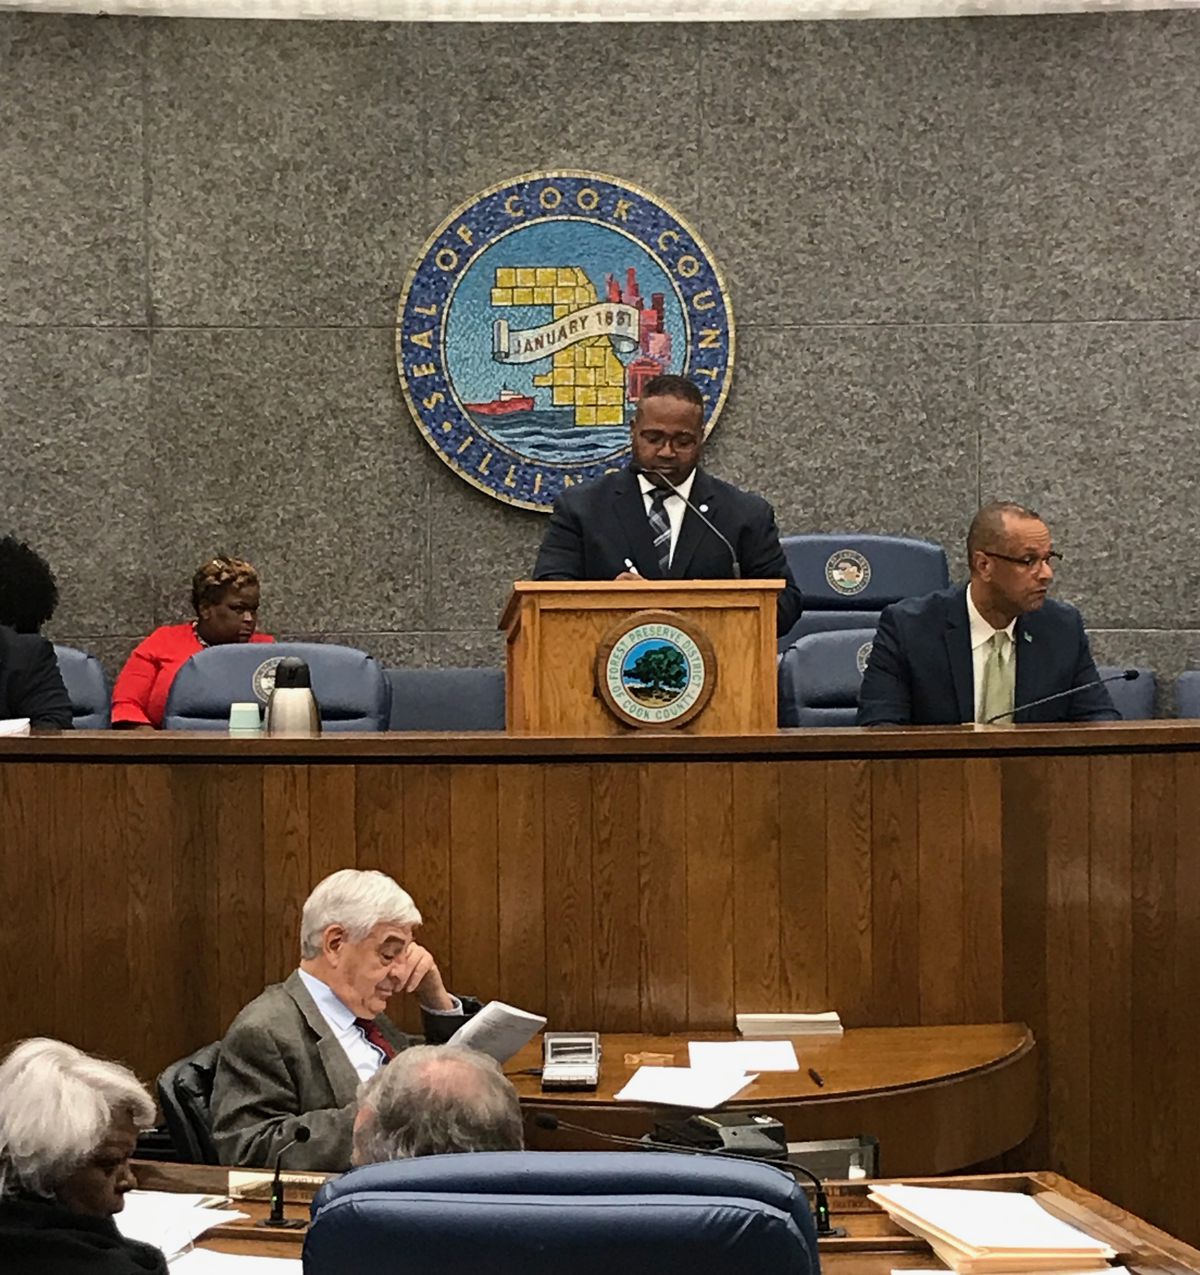 Cook County Commissioner Dennis Deer, along with Commissioner Stanley Moore, led the charge on legislation passed in December, making Juneteenth an official Cook County paid holiday. Forty-six states have made Juneteenth a state holiday, and a bill passed by the Illinois House and Senate this legislative session now sits on Gov. Gov. J.B. Pritzker’s desk.